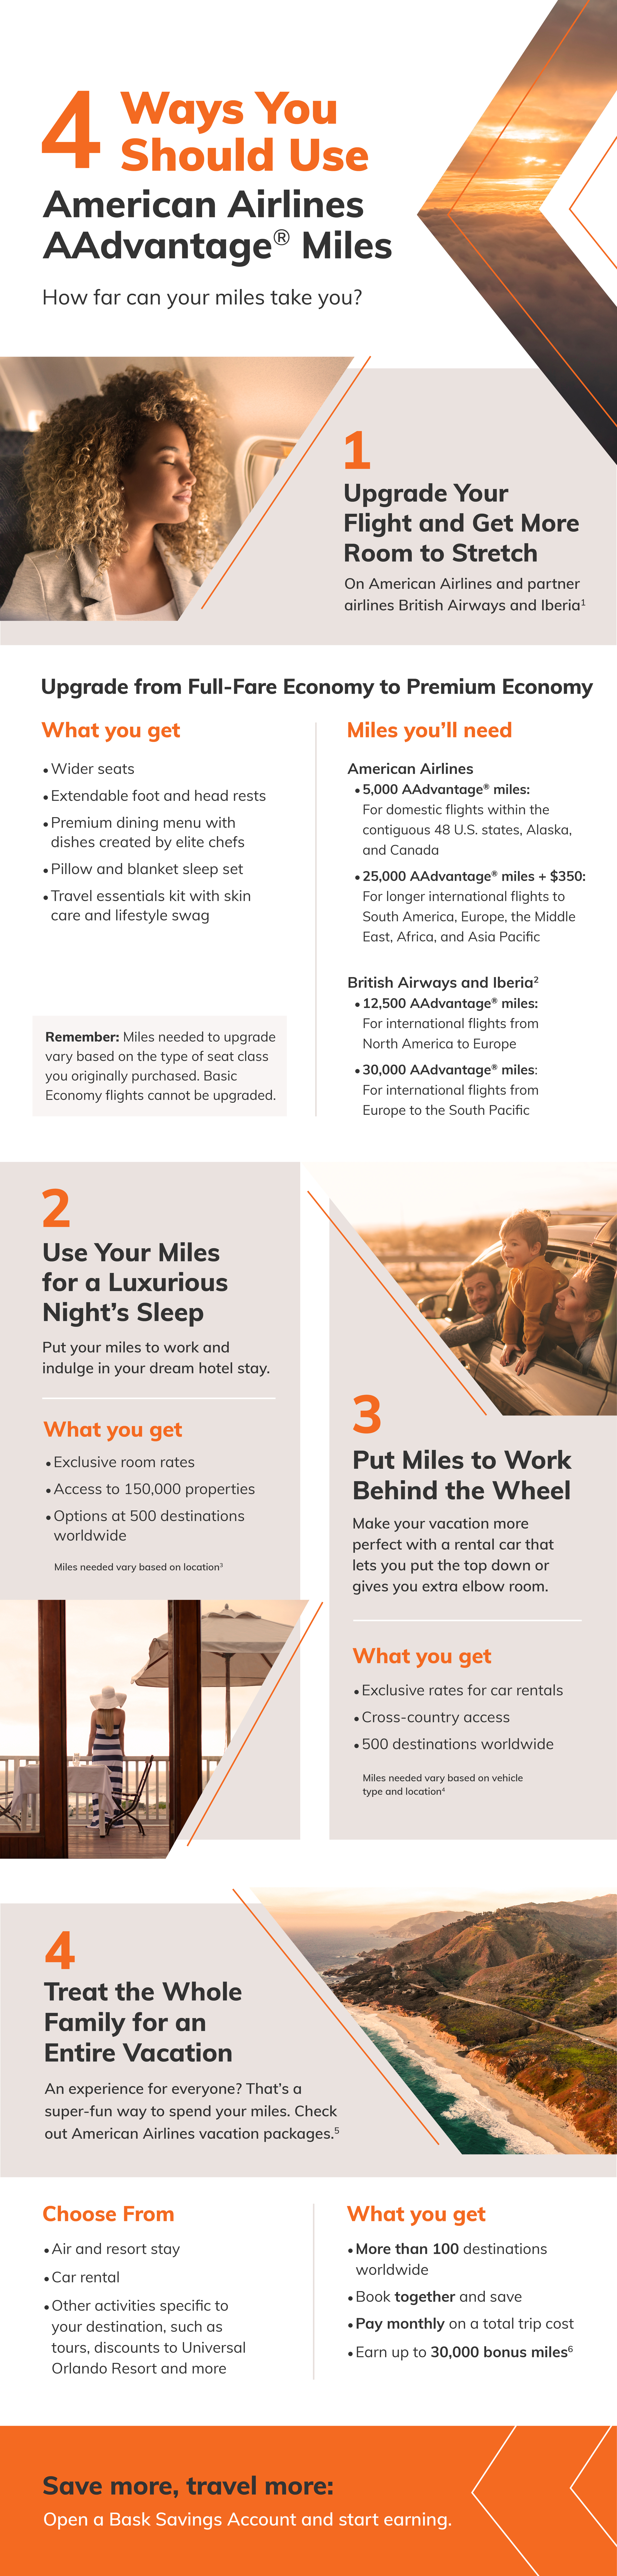 4 ways you should use AA miles infographic